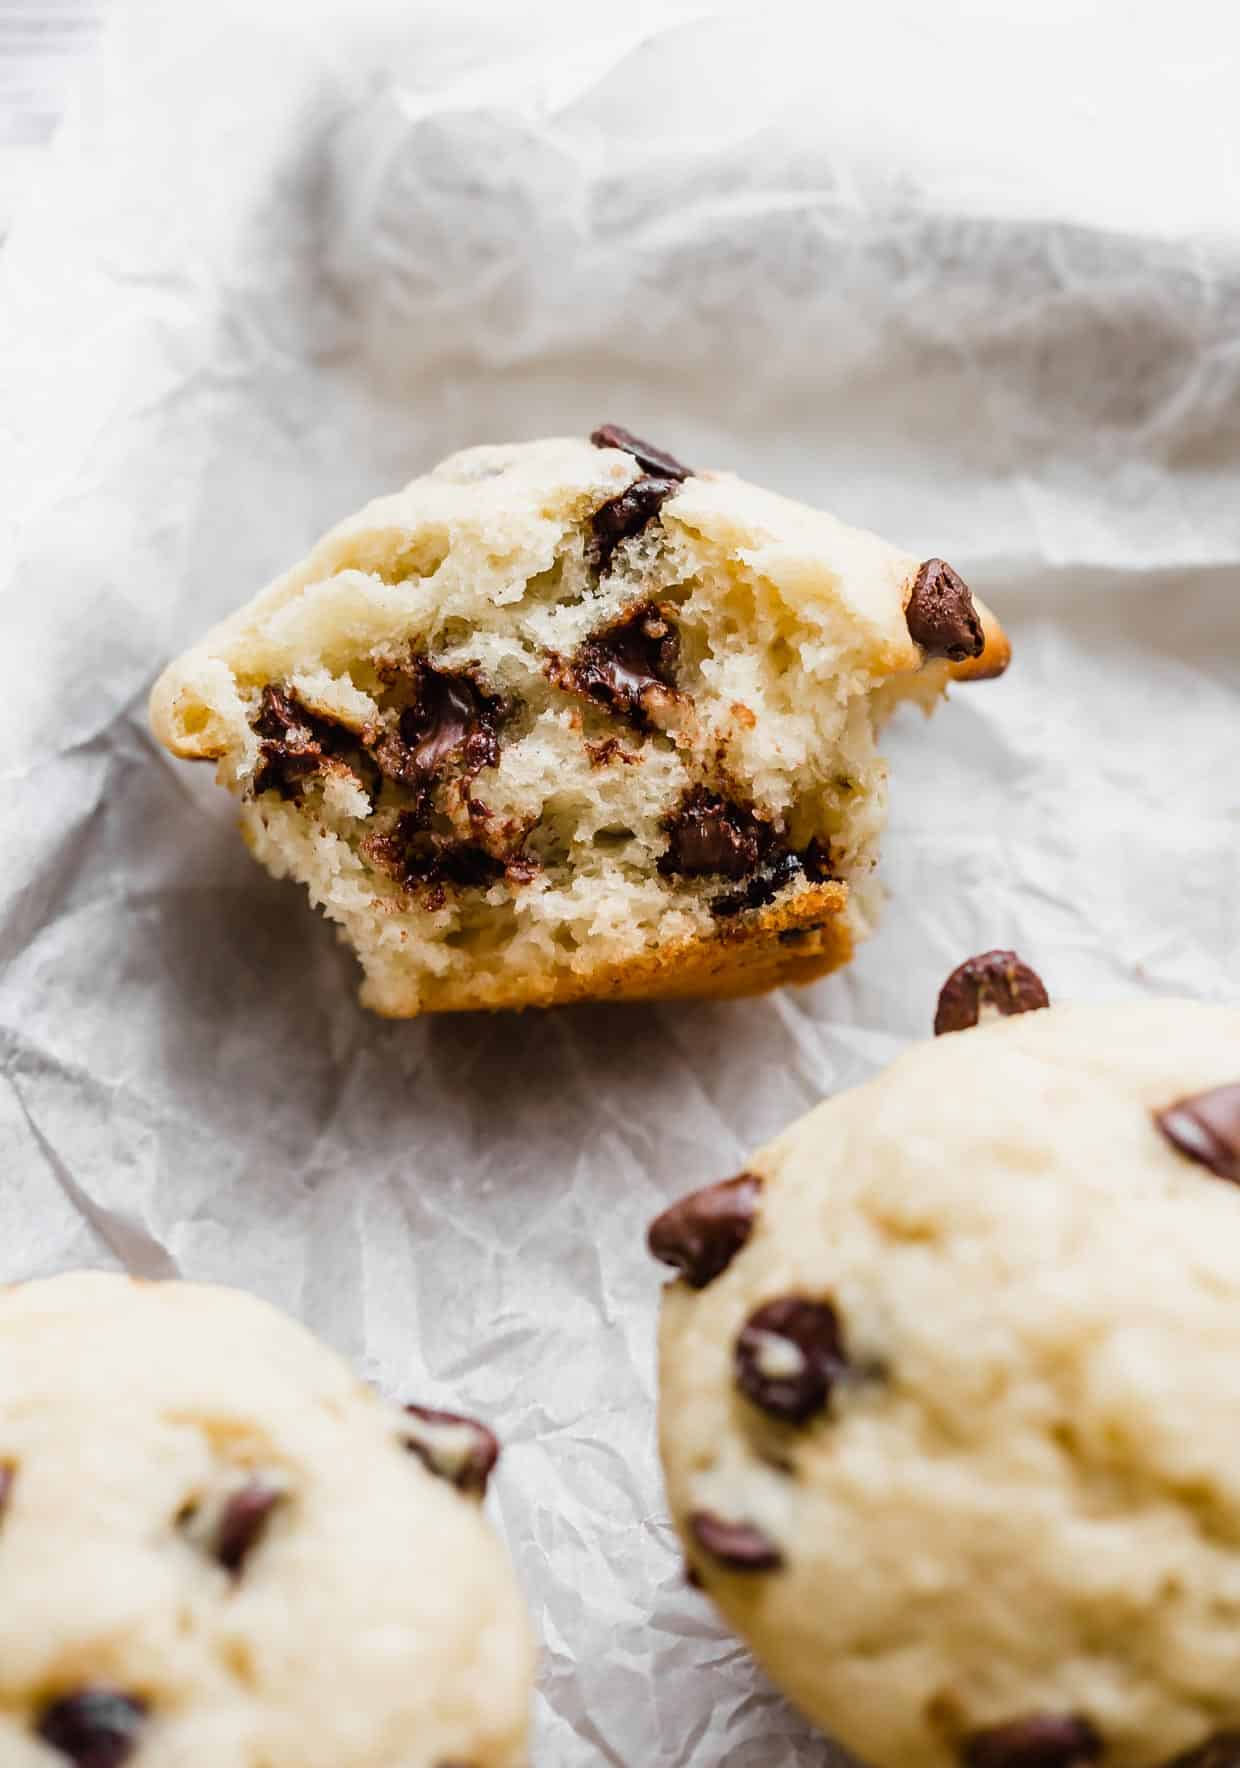 A Buttermilk Banana Chocolate Chip Muffin cut in half on a white parchment paper.